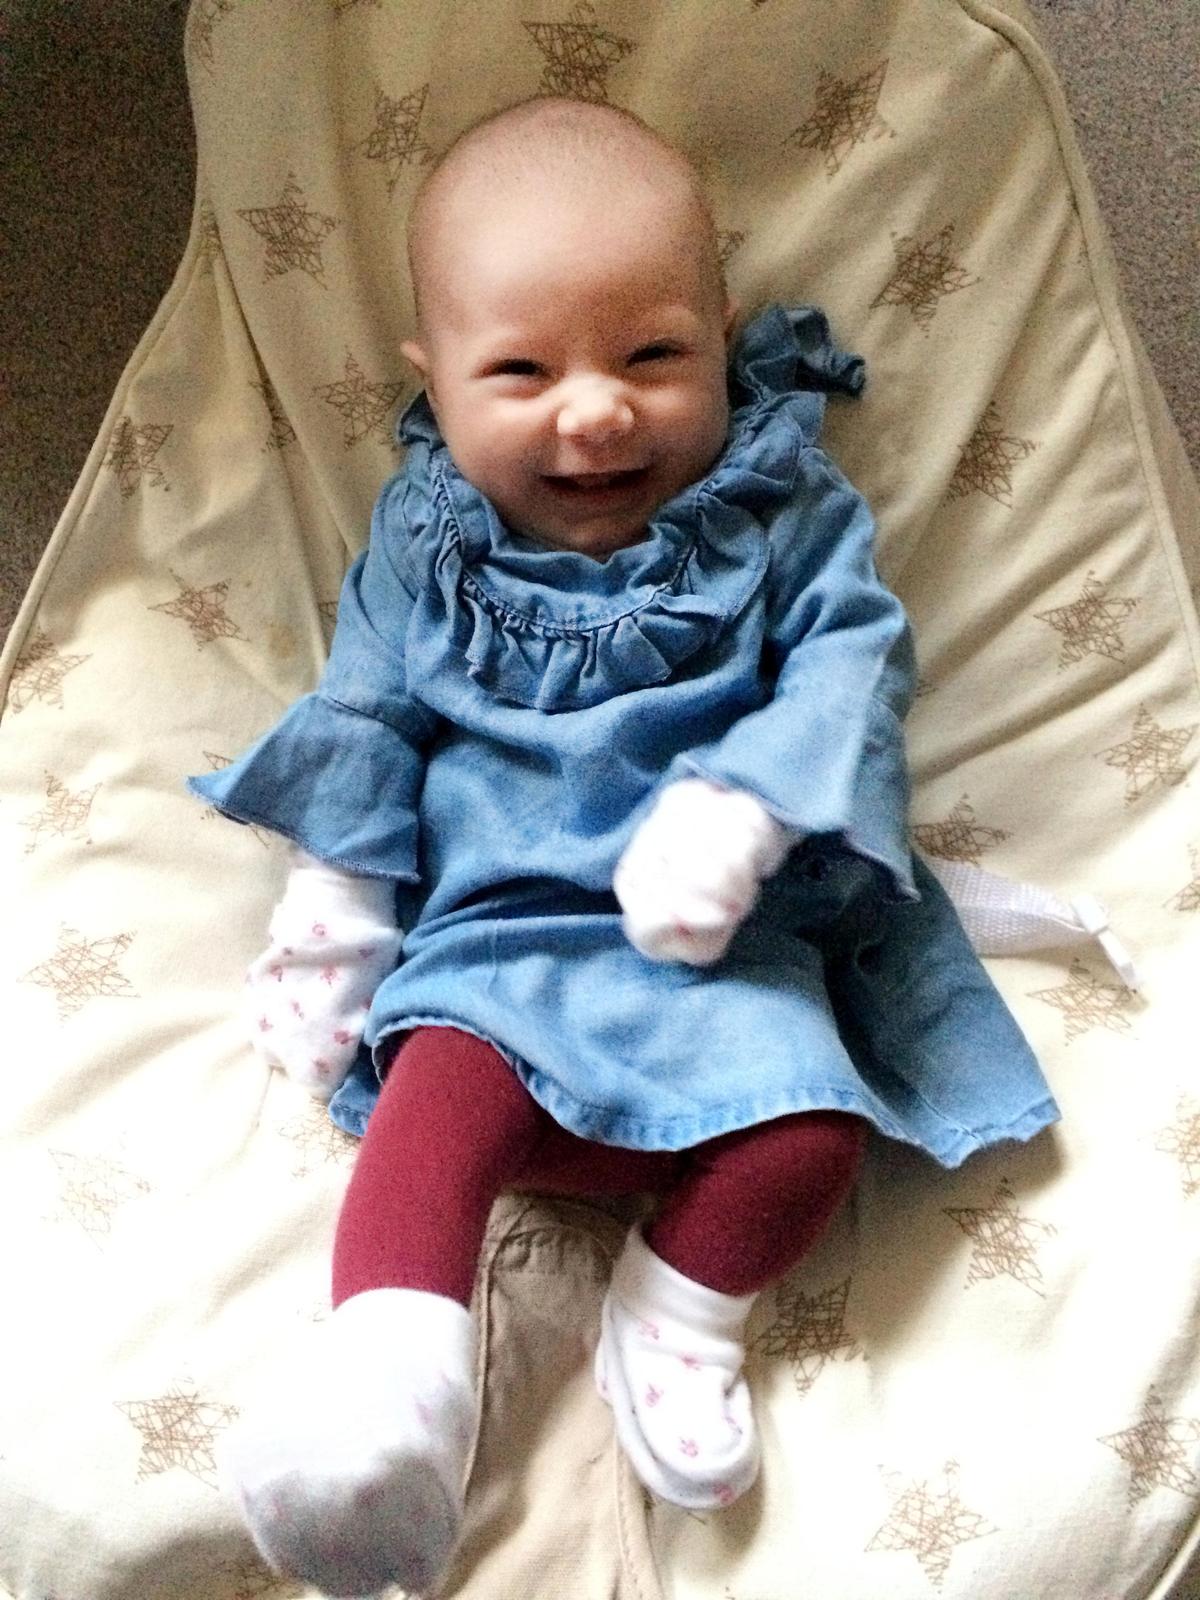 Danielle McSherry-Schee's daughter Isabella having a good laugh (Caters News)